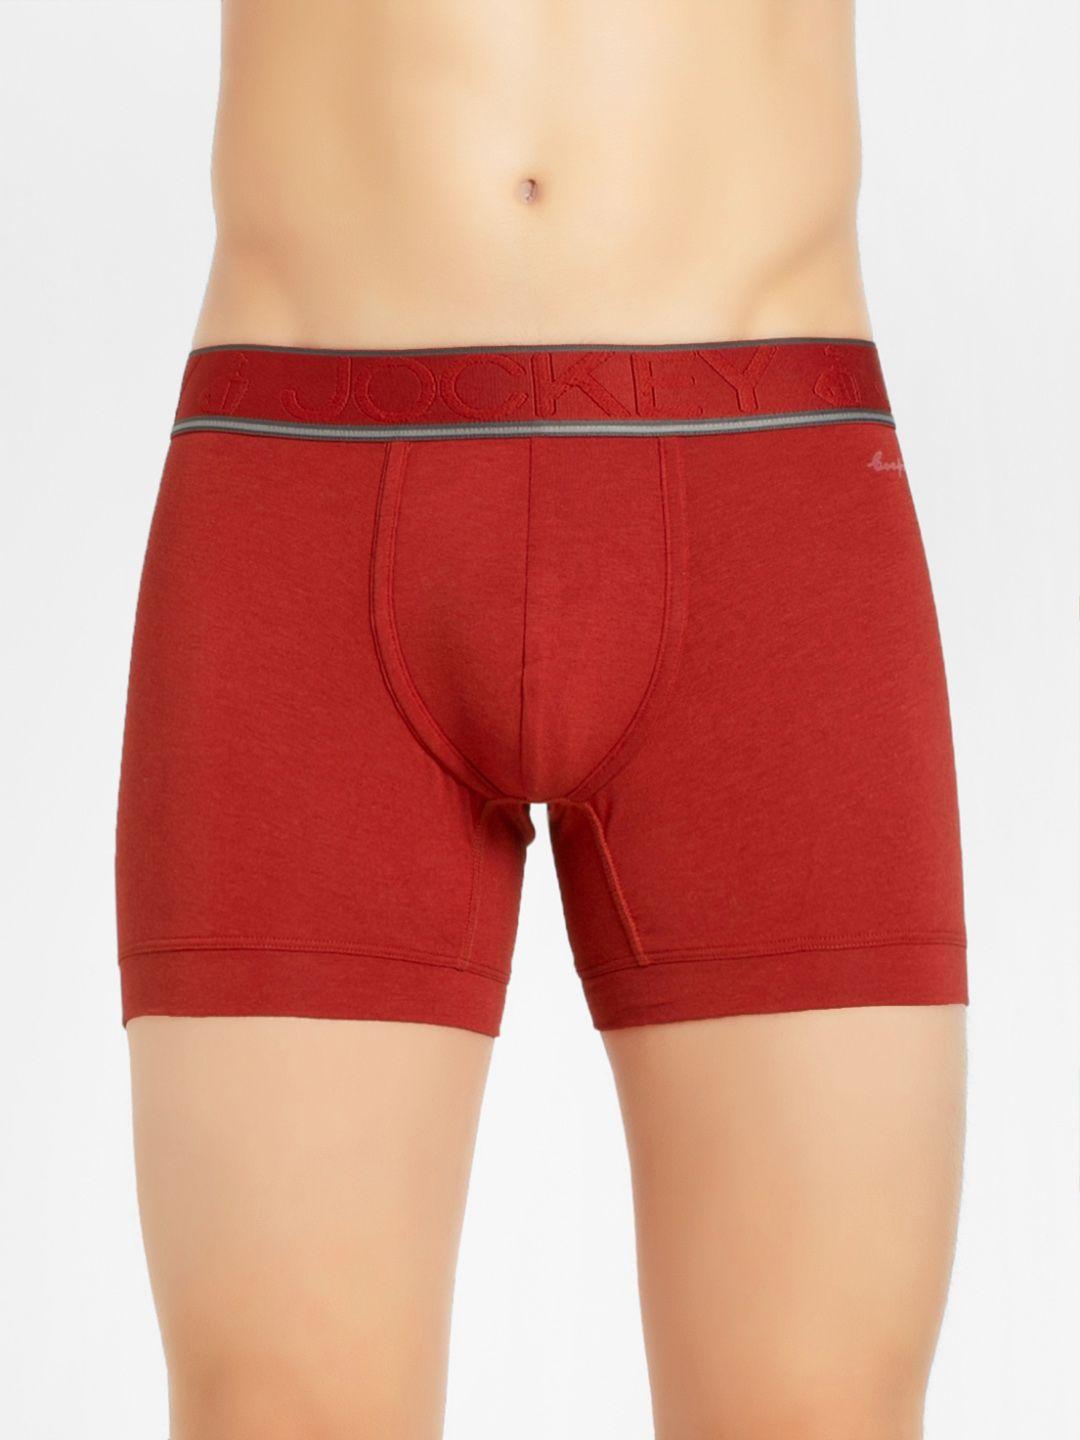 jockey-heritage-collection-men-red-solid-trunks-hg16